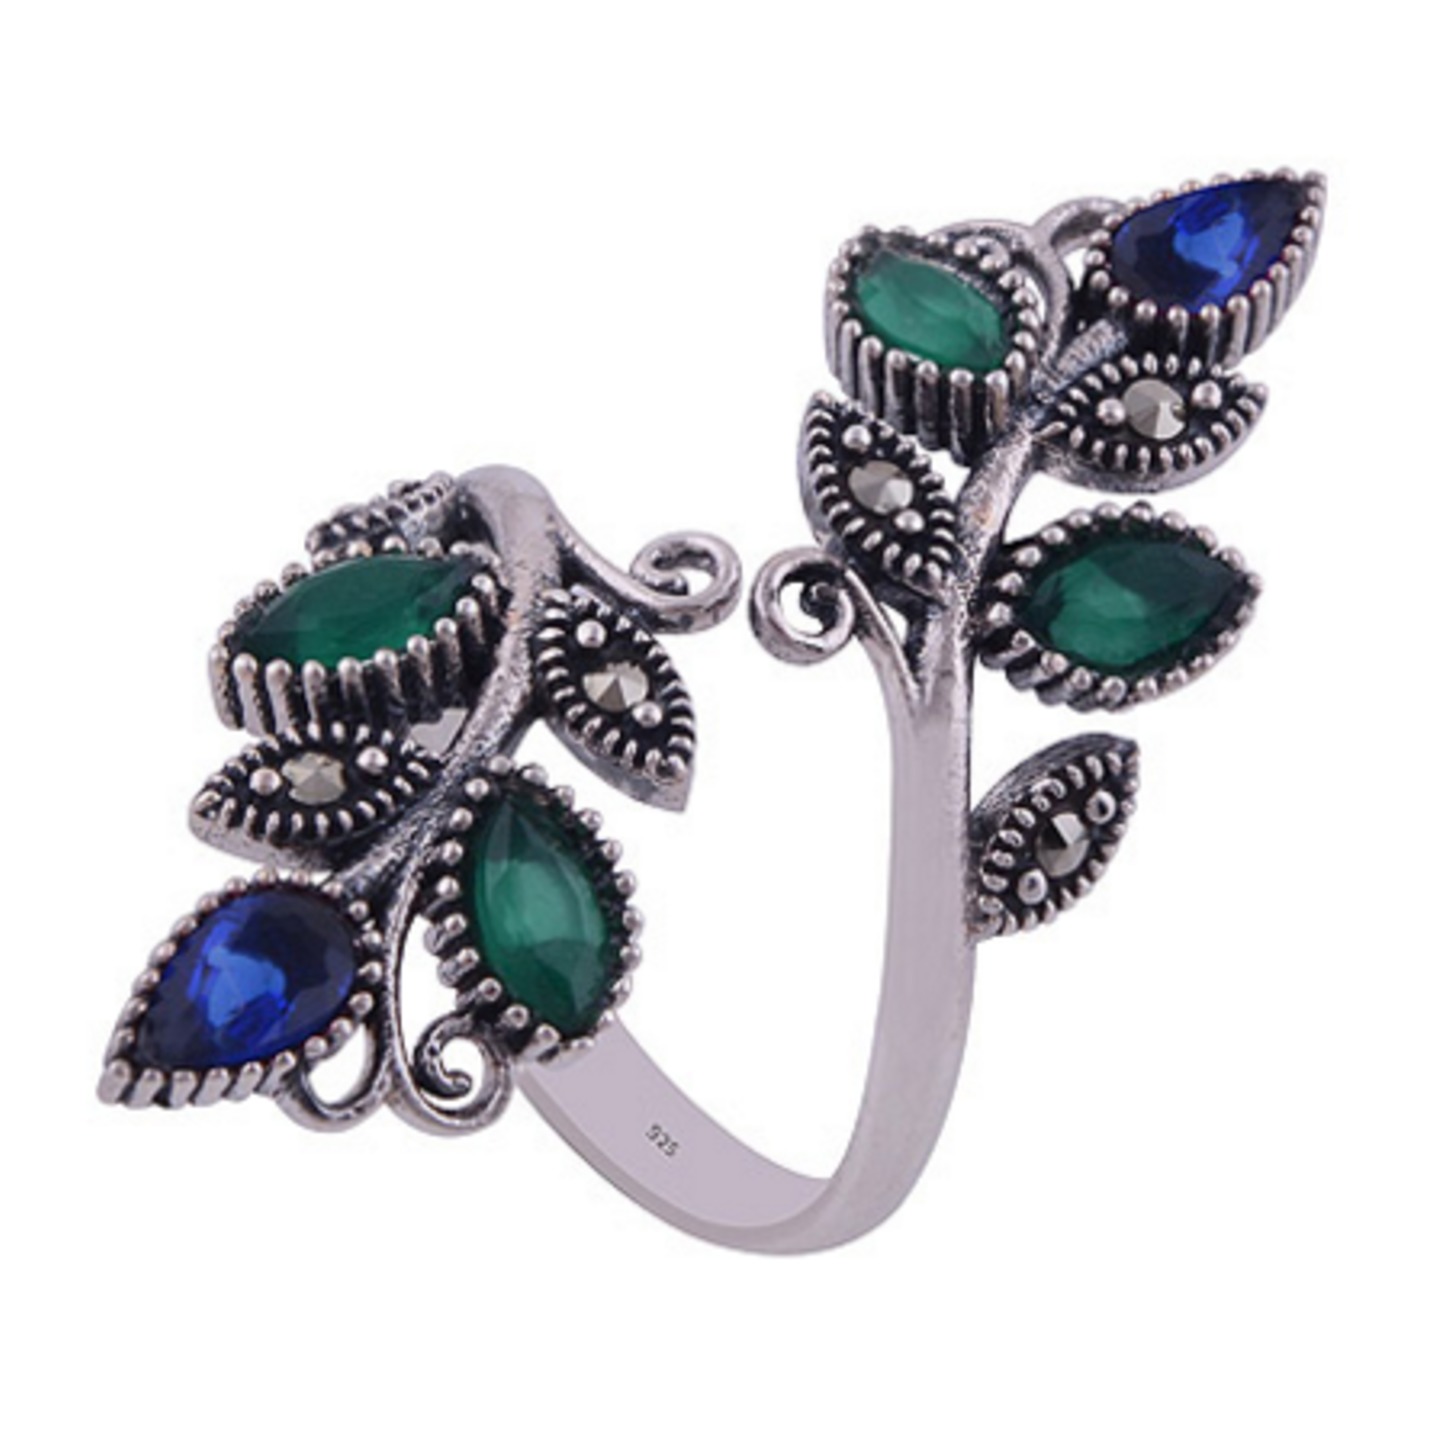 The Green Blue Vine Silver Ring